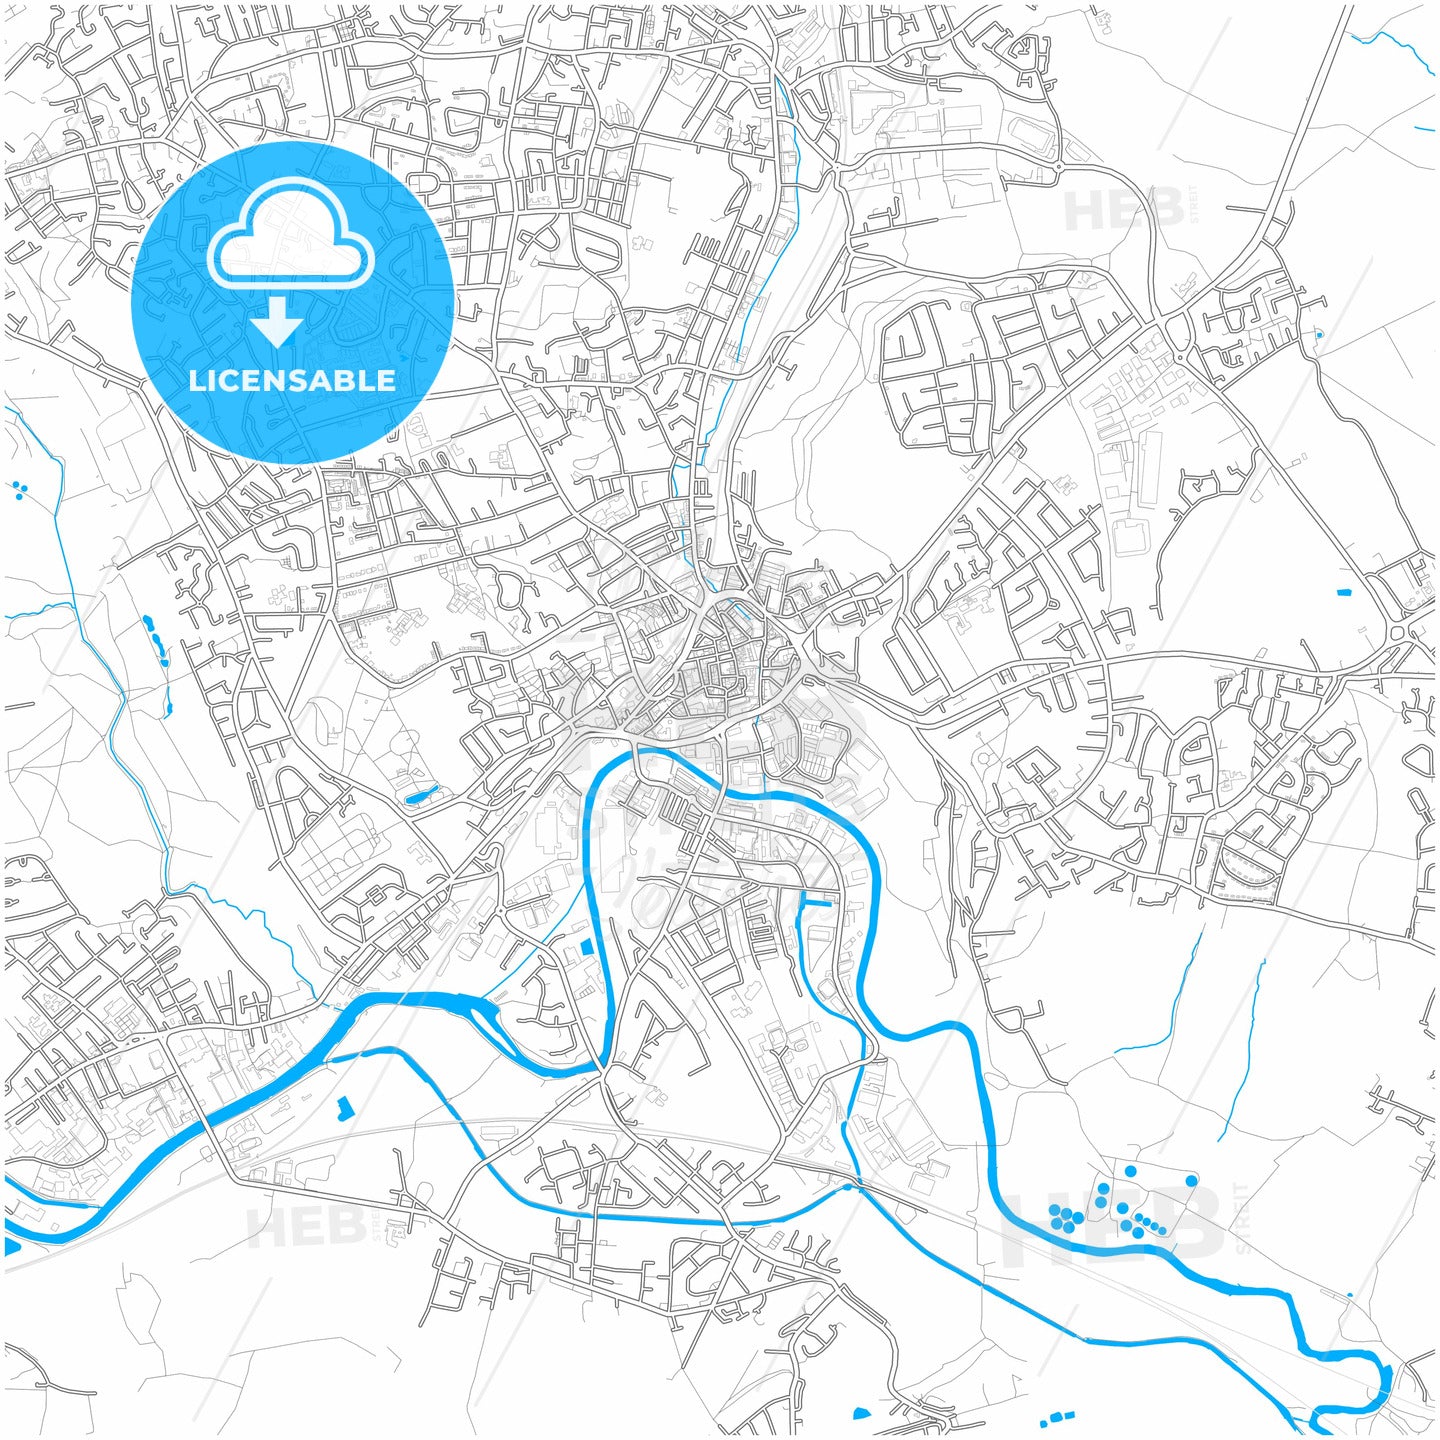 Dewsbury, Yorkshire and the Humber, England, city map with high quality roads.